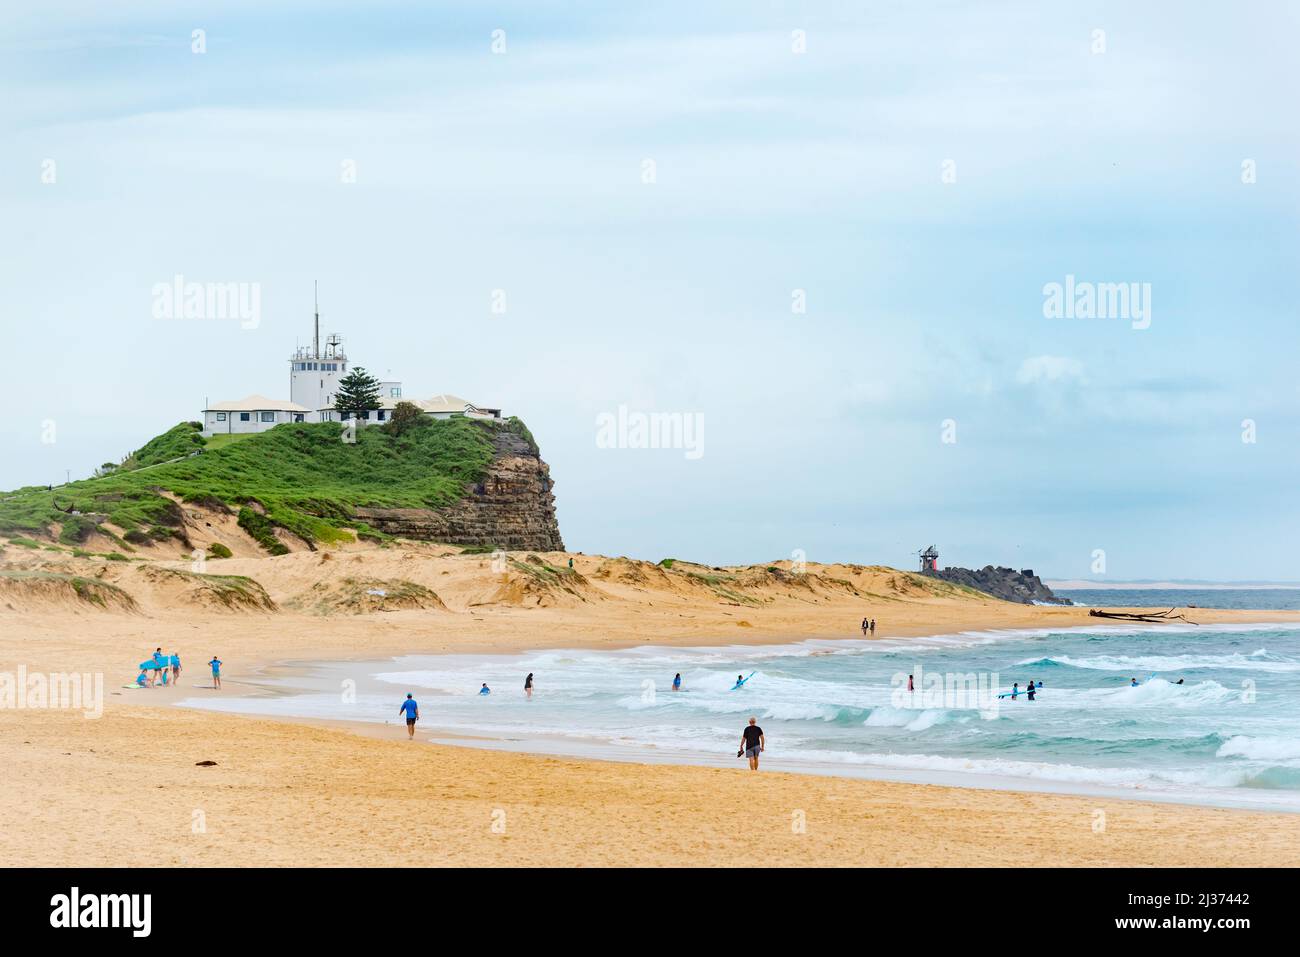 People swimming and walking on Nobbys Beach, Newcastle, Australia below the still active Nobbys Lighthouse that was originally constructed in 1846 Stock Photo